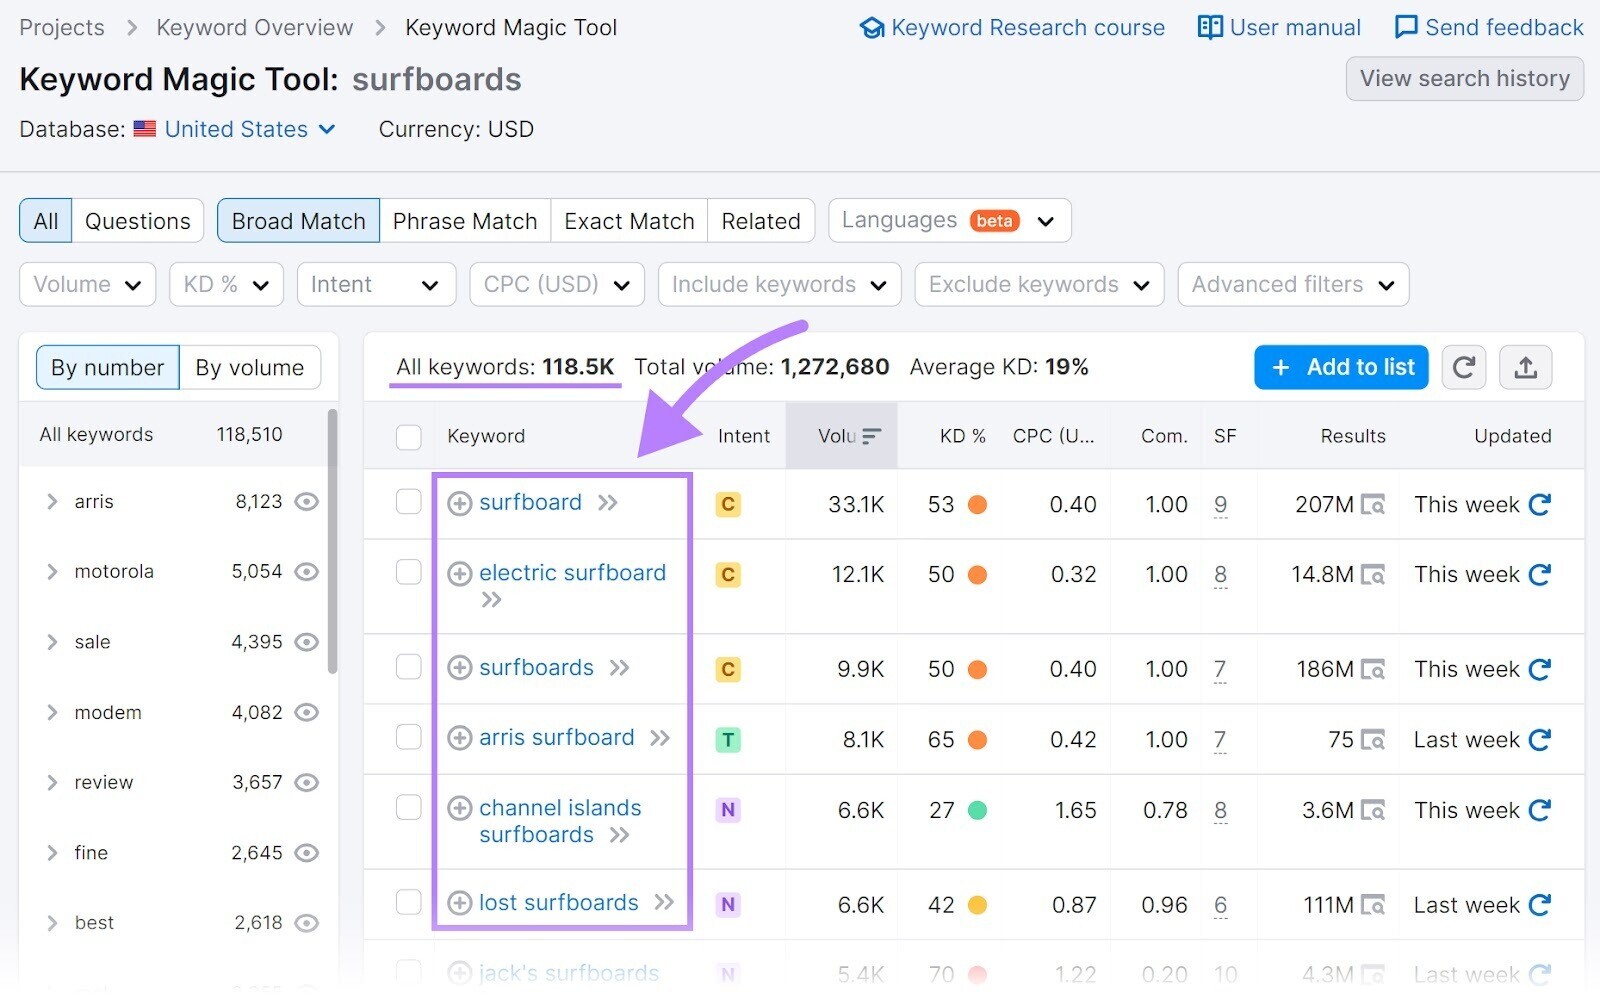 Keyword Magic Tool results for "surfboards"